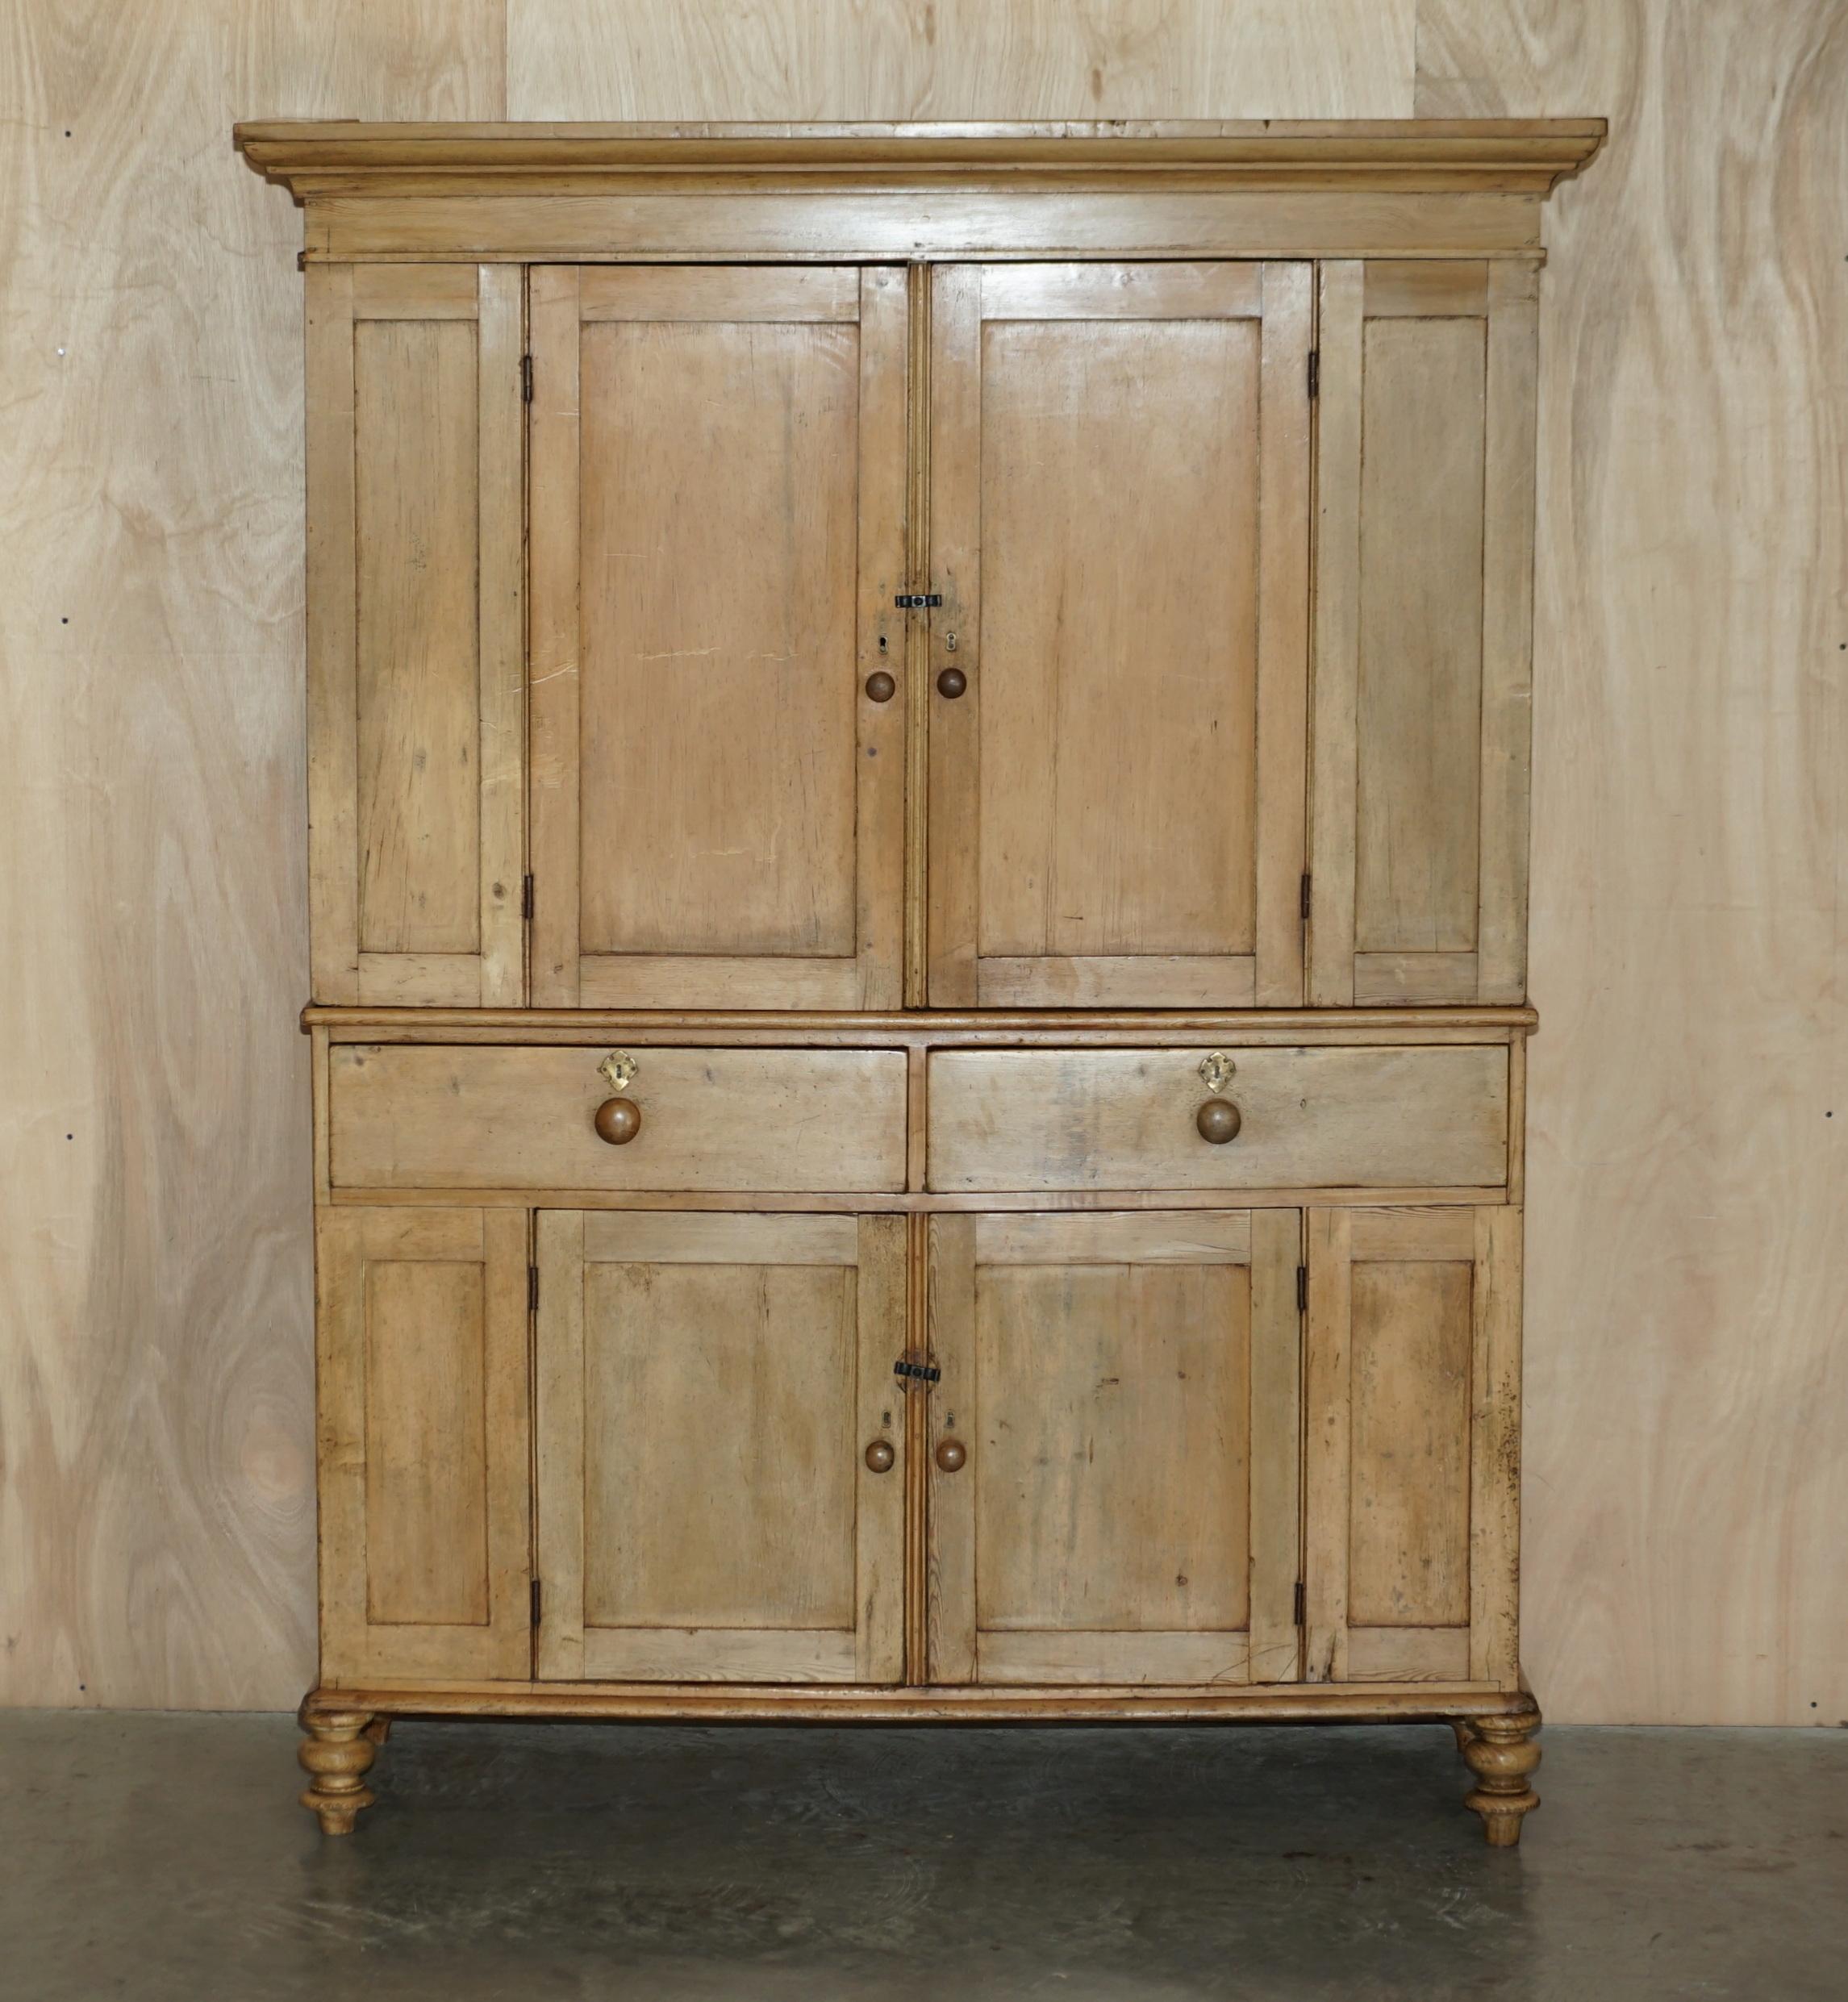 We are delighted to offer for sale this stunning highly collectable Victorian oak housekeepers cupboard for linens or pots.

A very charming and highly collectable piece, this is one of the larger examples I have come across, it has huge amounts